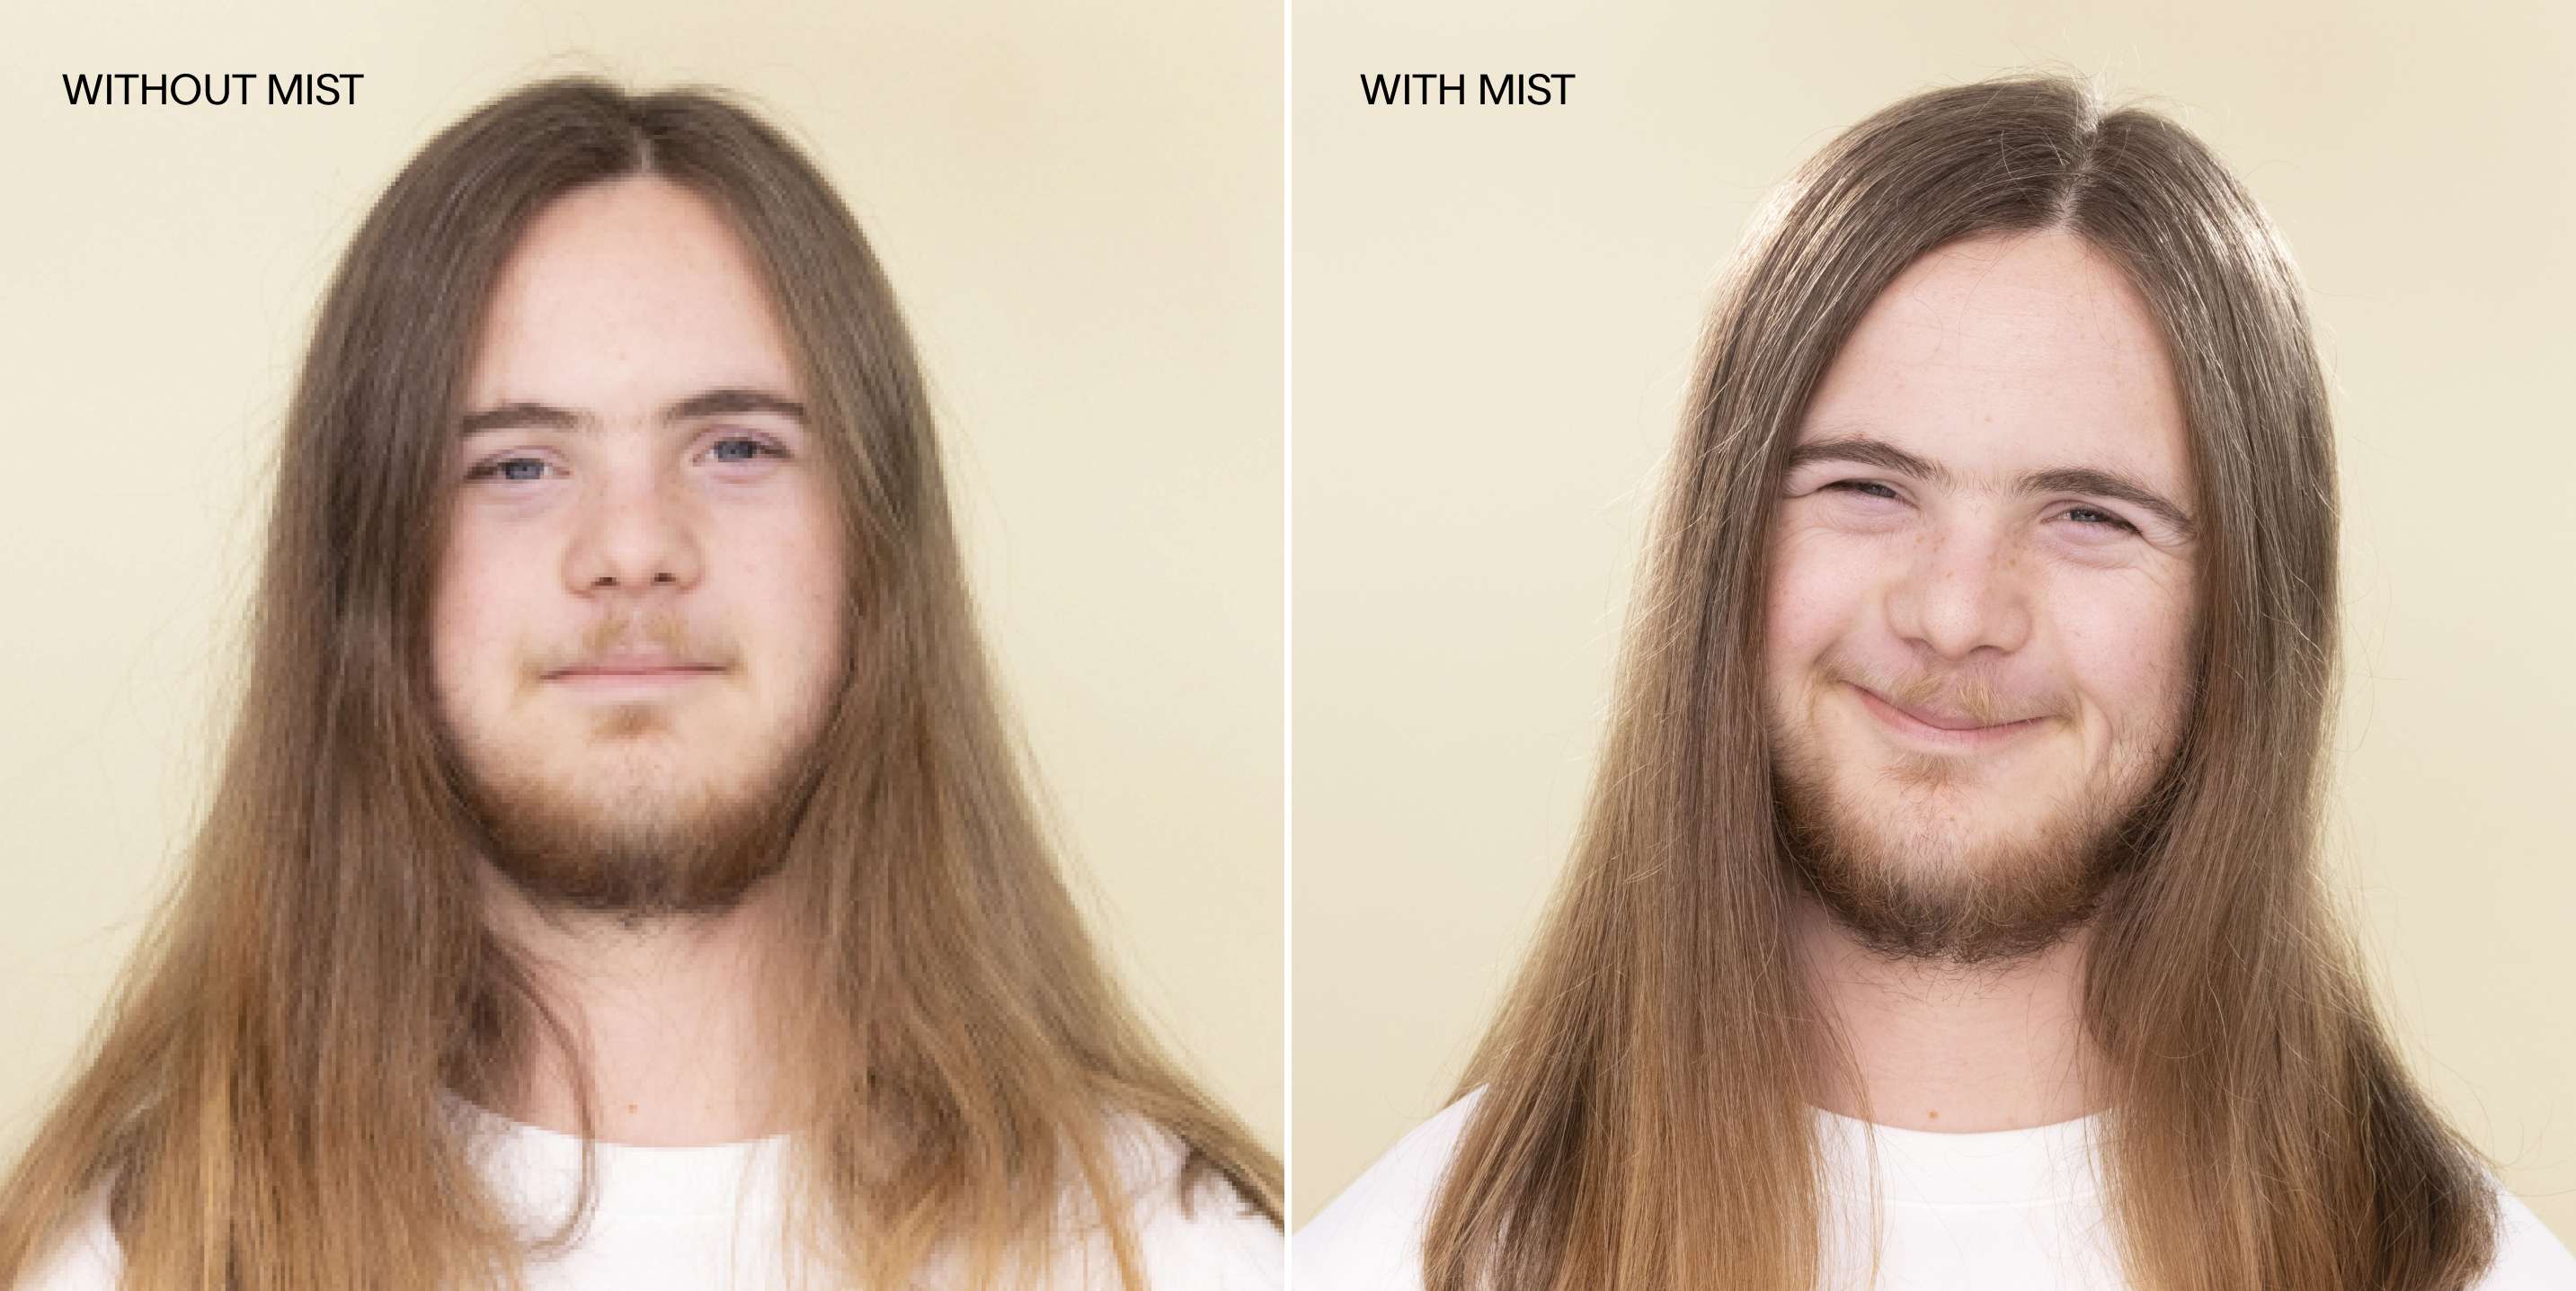 Model with long dirty-blonde hair on a cream background. Left image shows image of model without Complete Conditioning Mist in hair, right image shows model with Complete Conditioning Mist in hair. 